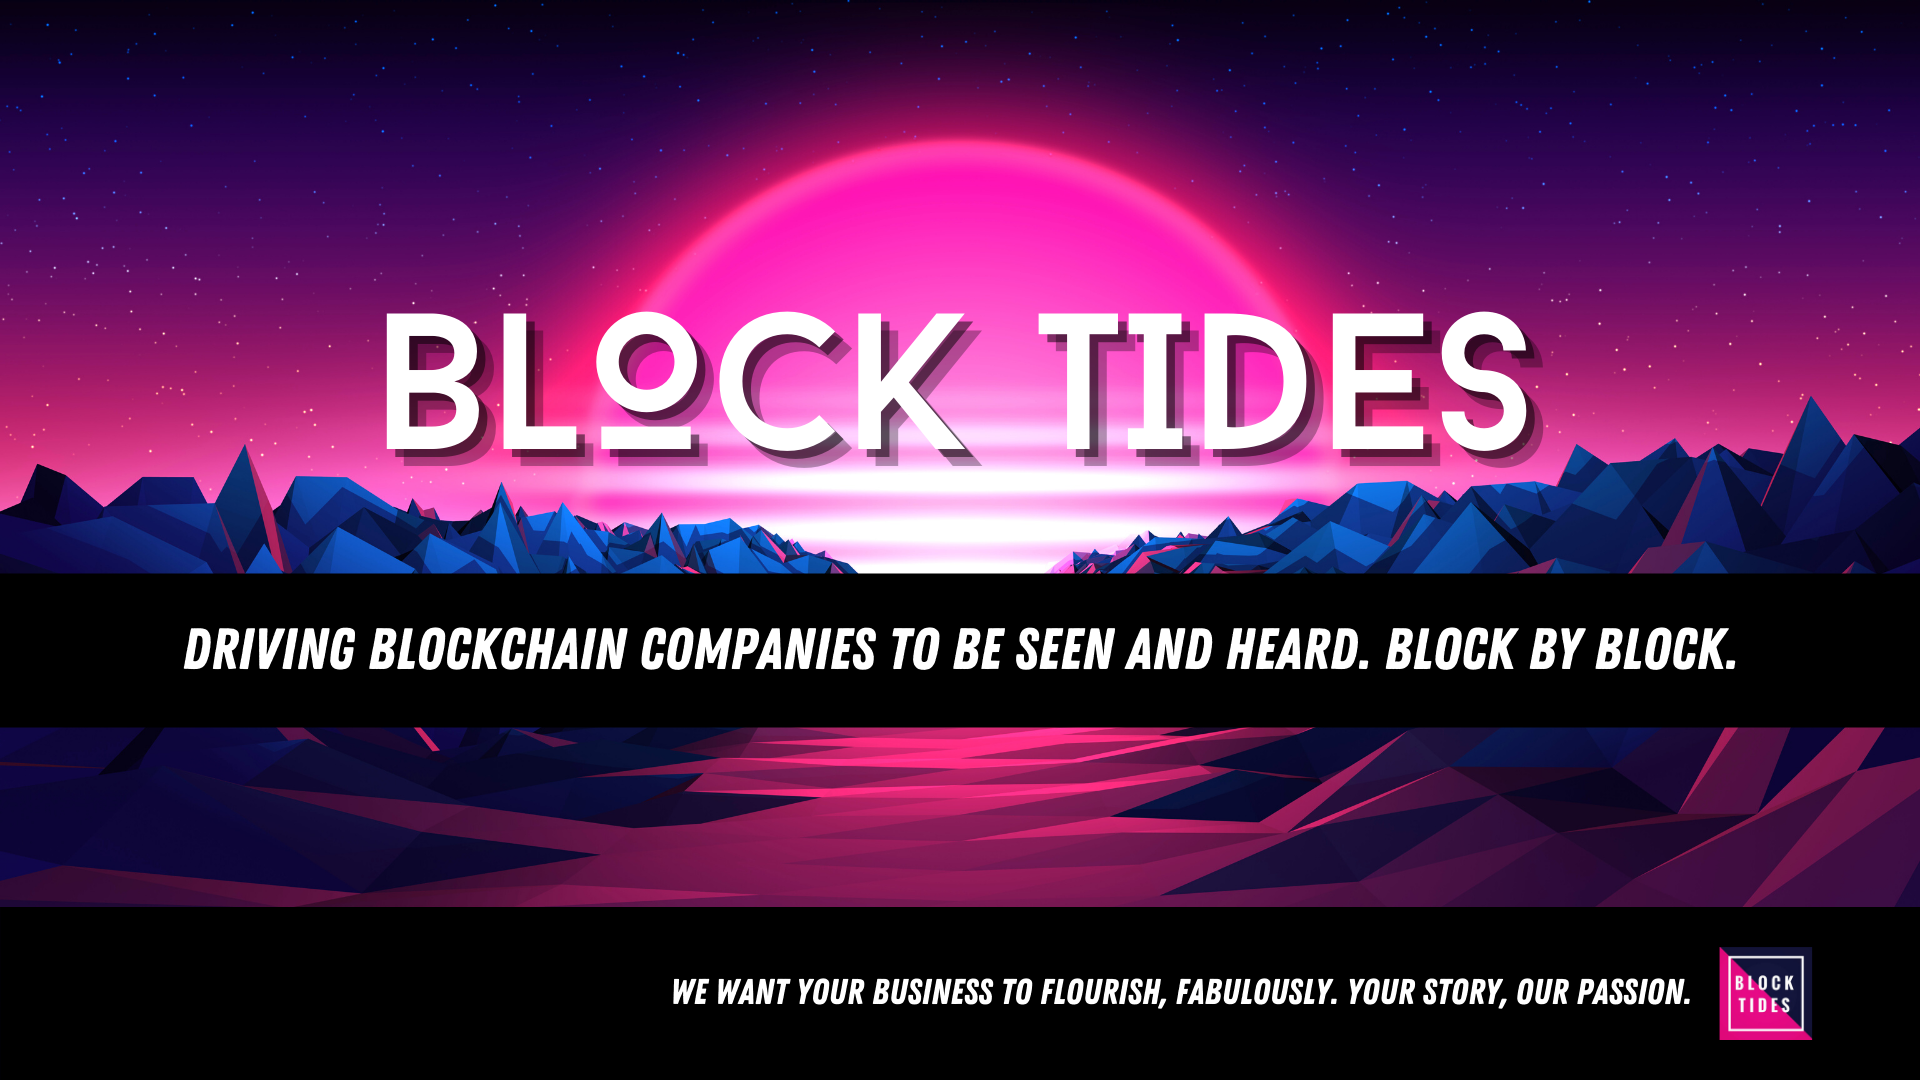 Block Tides — We want your business to flourish, fabulously. Your story, our passion.